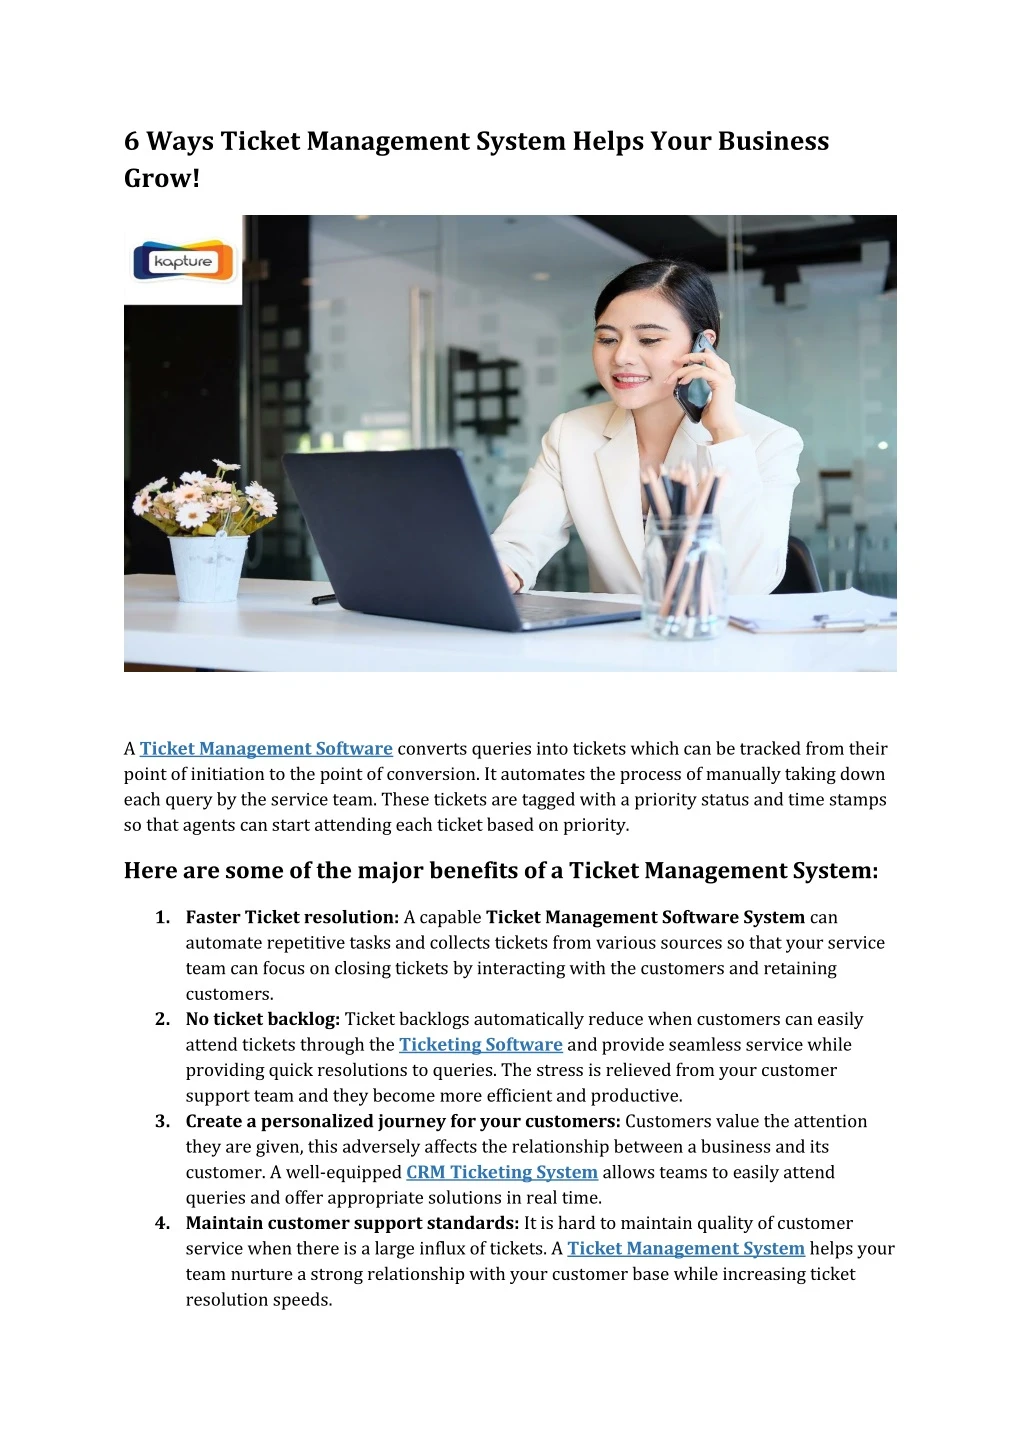 6 ways ticket management system helps your